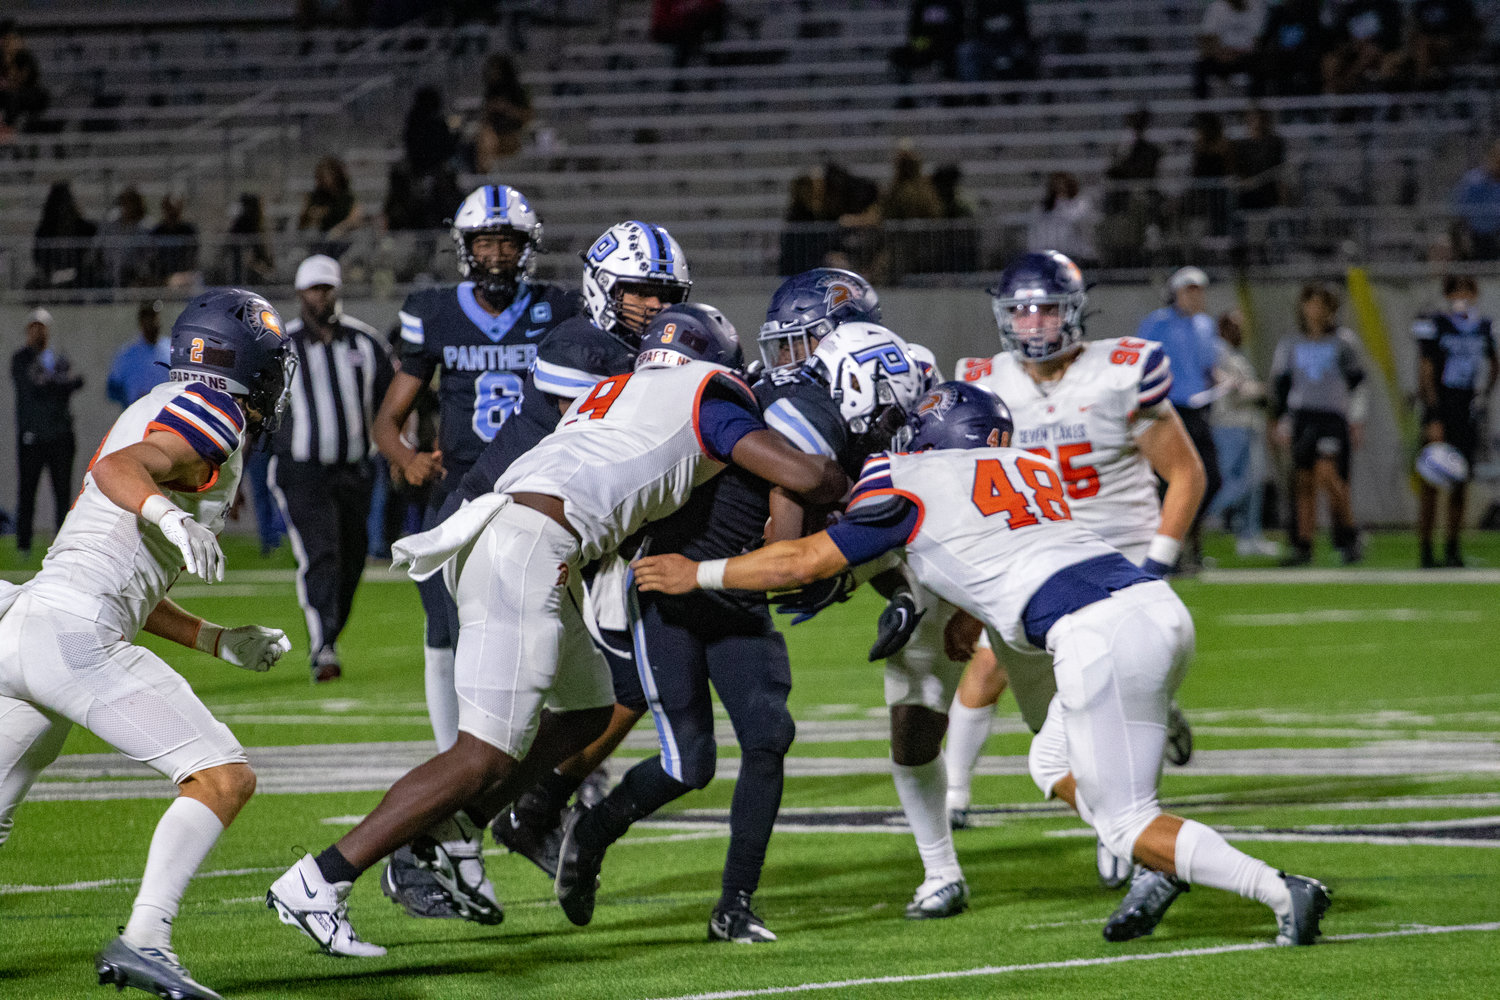 Paetow's Damyrion Phillips is wrapped up by the Seven Lakes defense during Thursday's game between Paetow and Seven Lakes at Legacy Stadium.